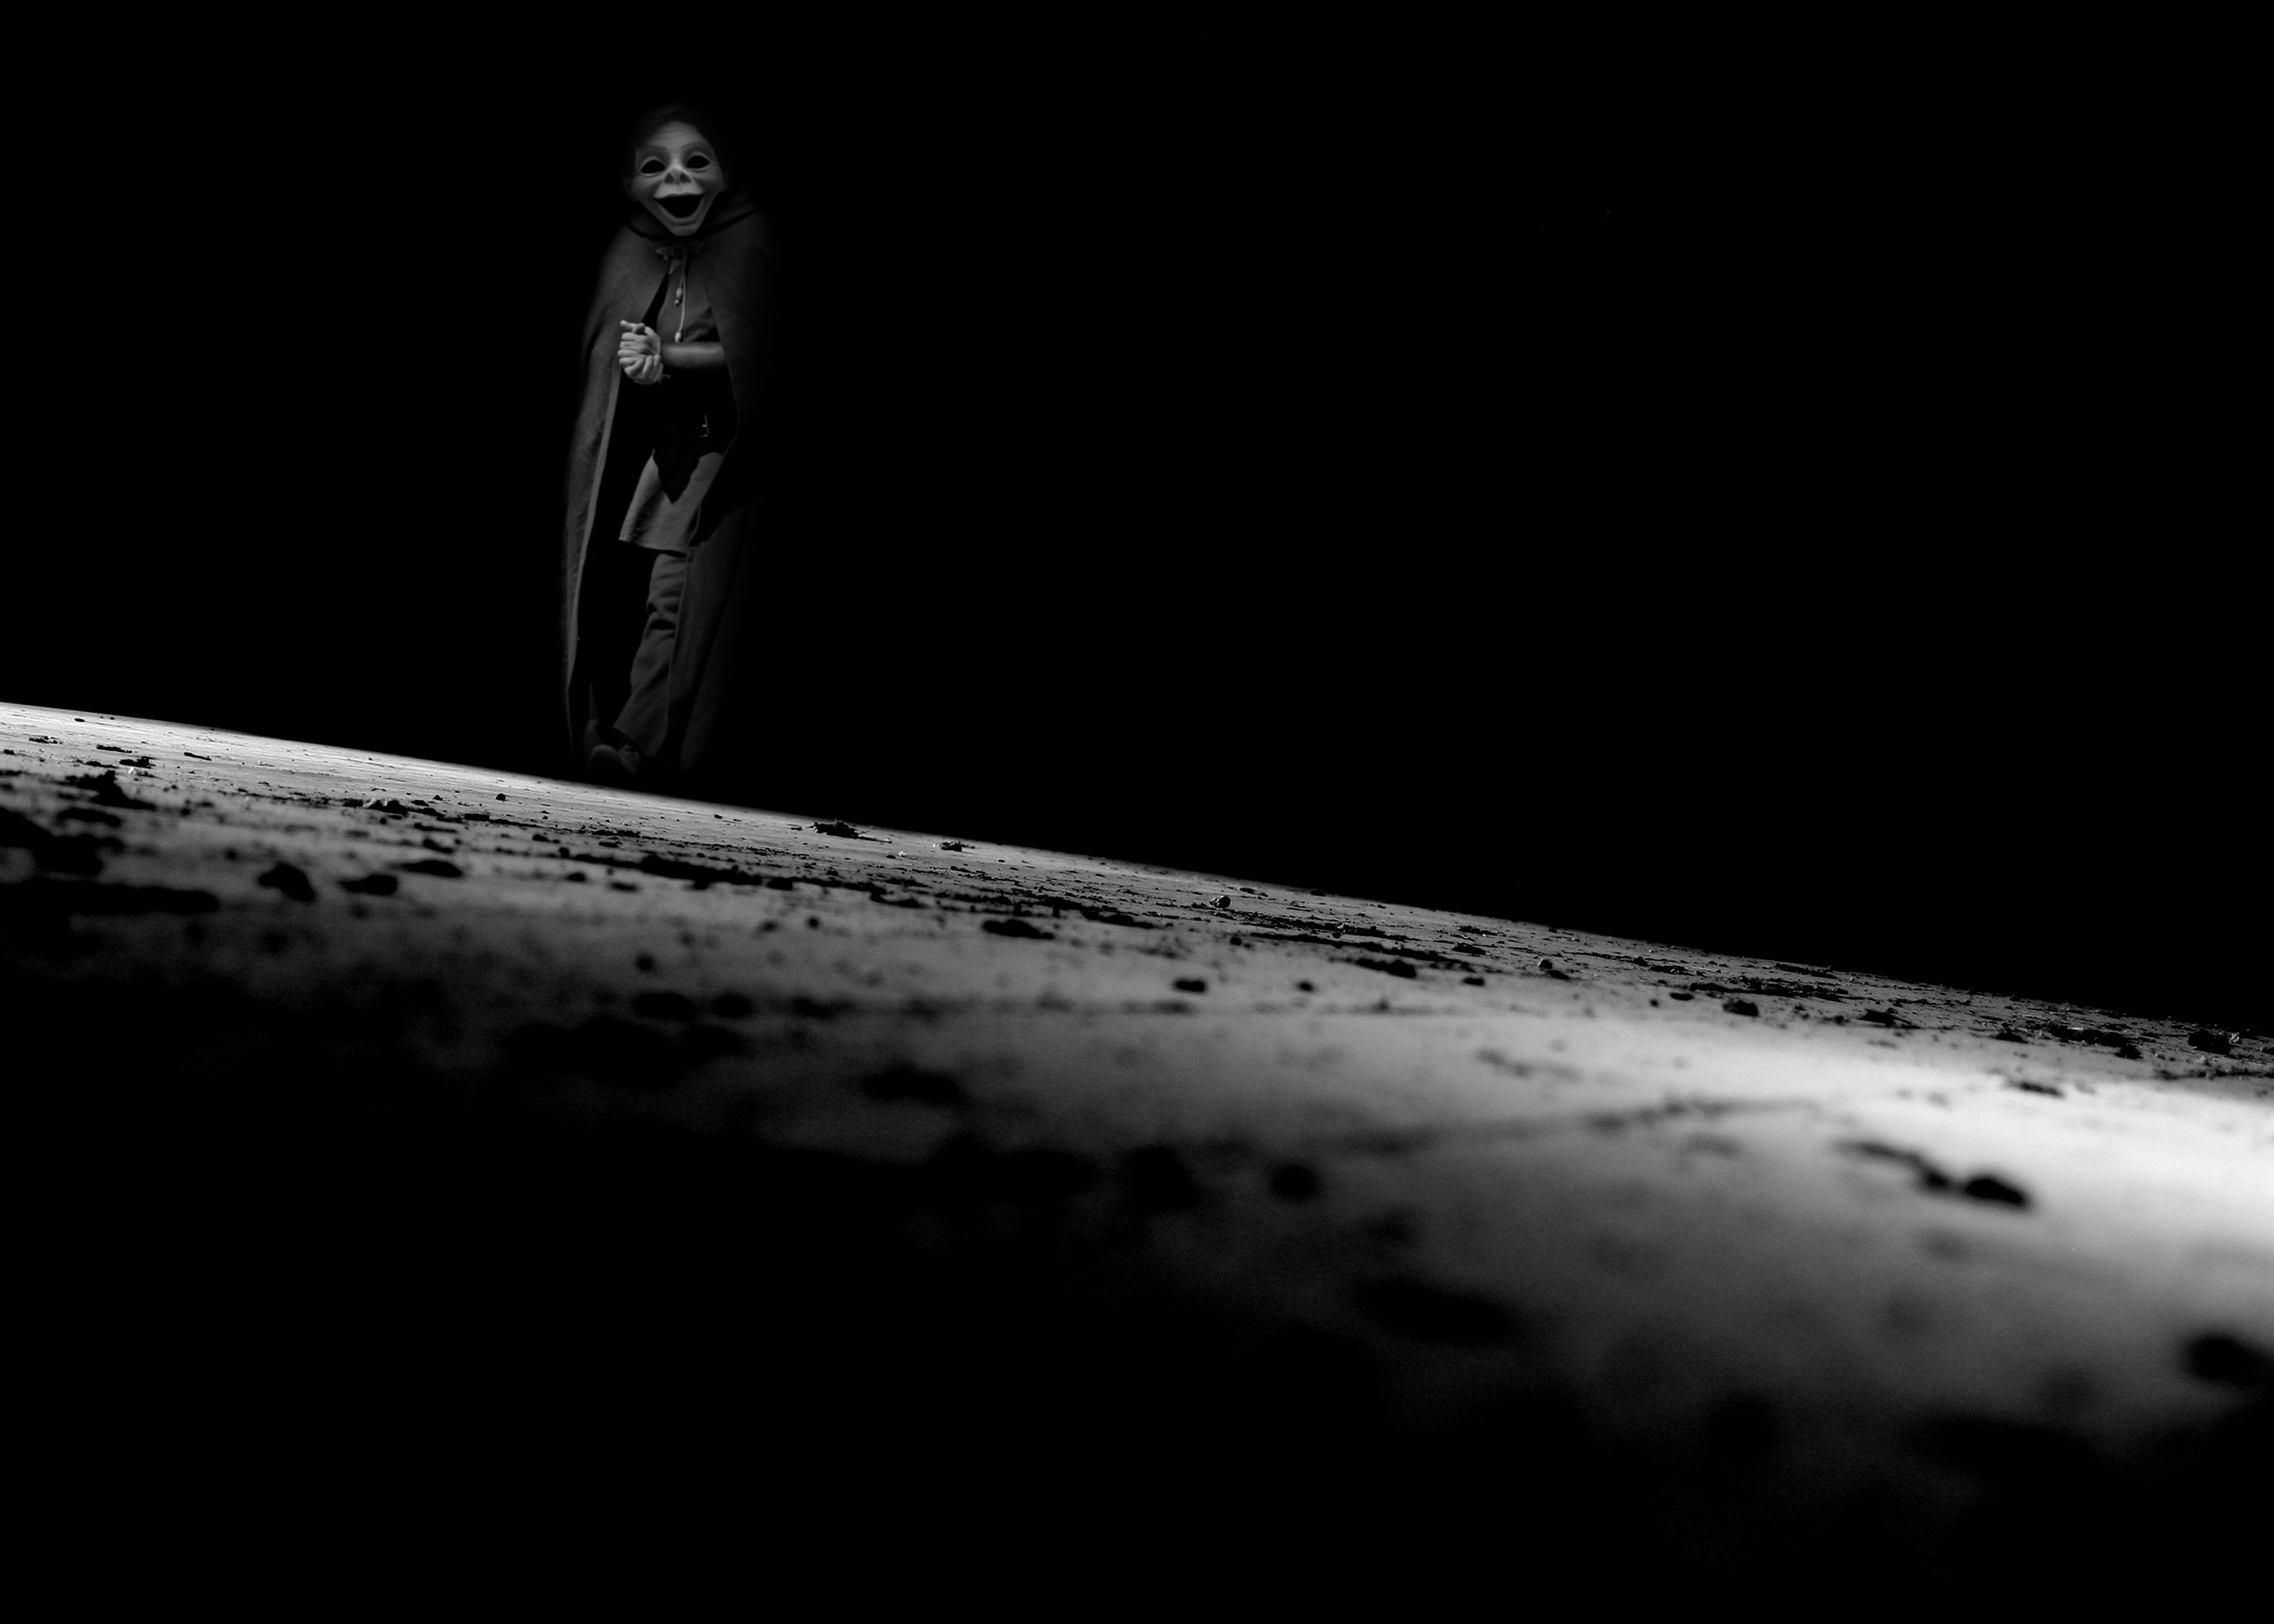 Wallpaper, dark, night, horror, space, sky, spooky, Halloween, mask, dirt, death, nightmare, ghost, midnight, light, blackandwhite, shadows, dream, floor, stage, photograph, darkness, computer wallpaper, atmosphere of earth, black and white, monochrome